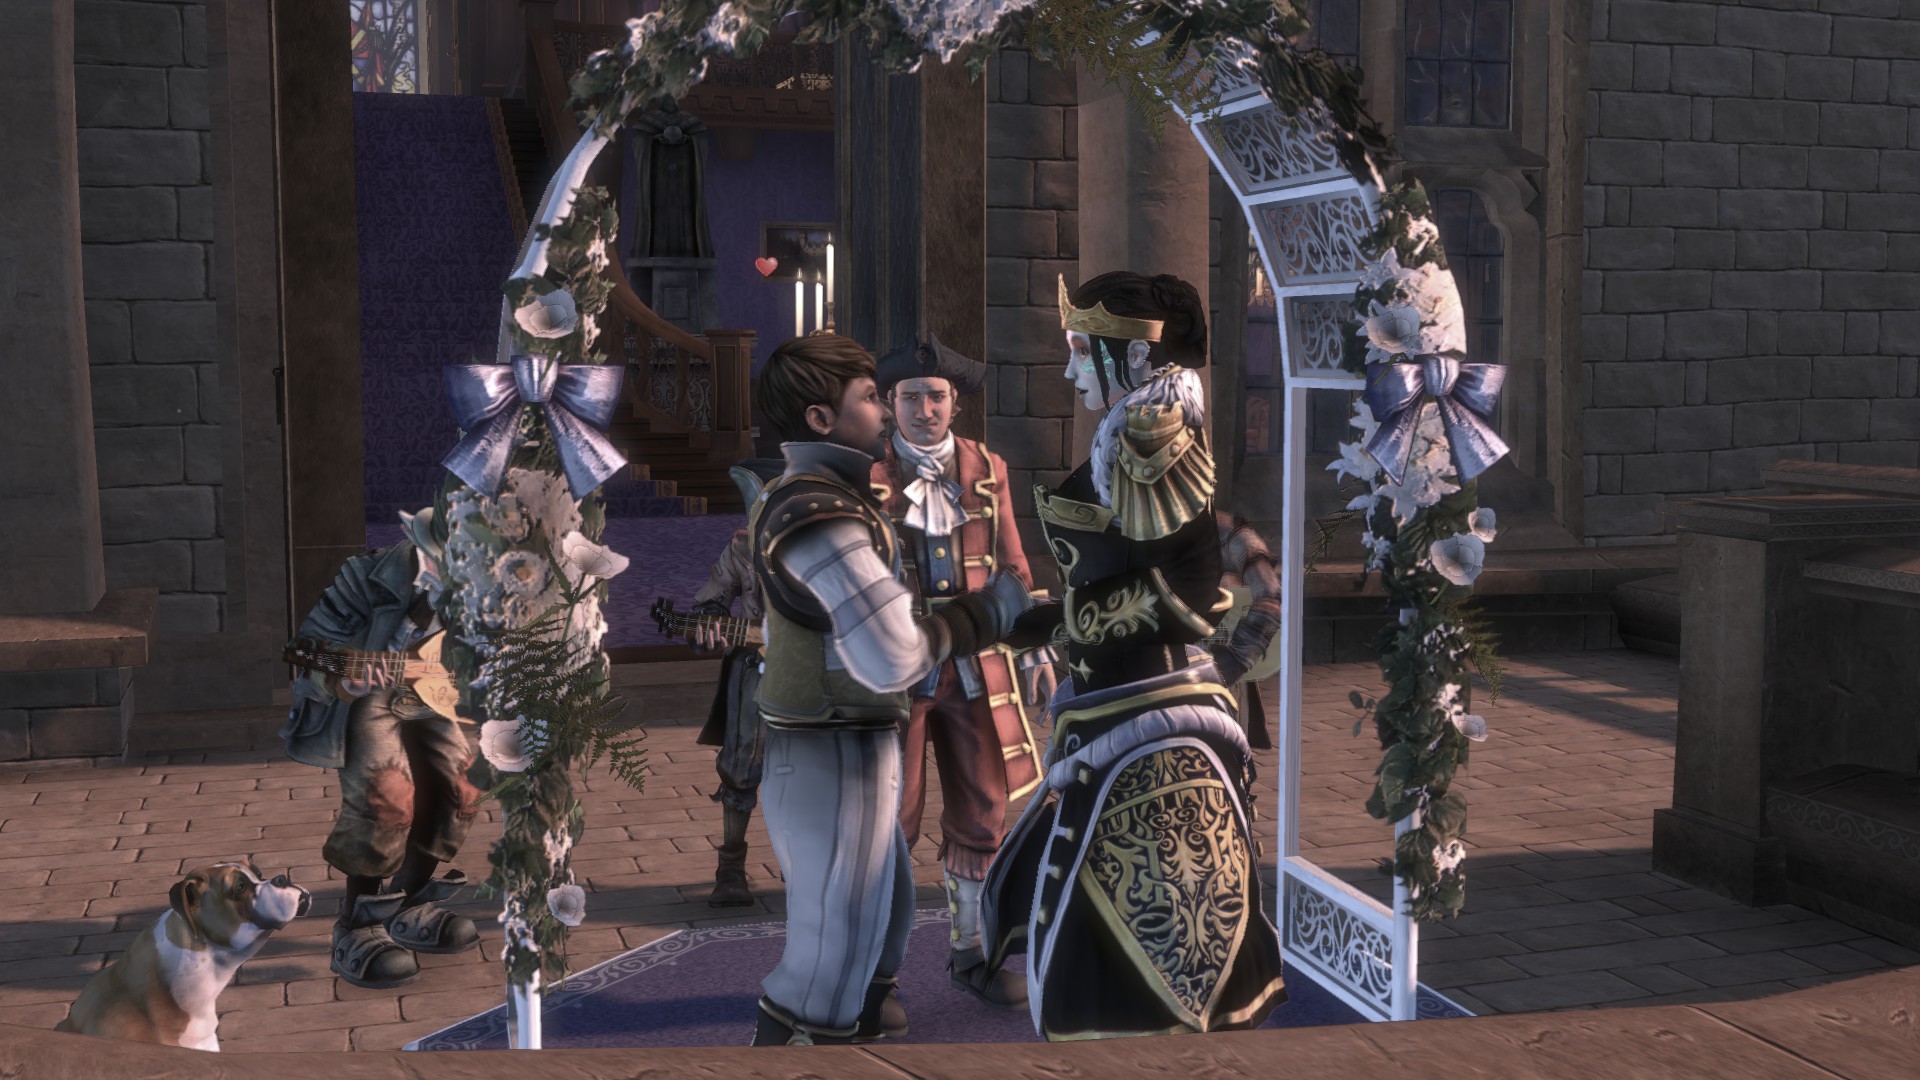 download fable 3 dlc pc for free